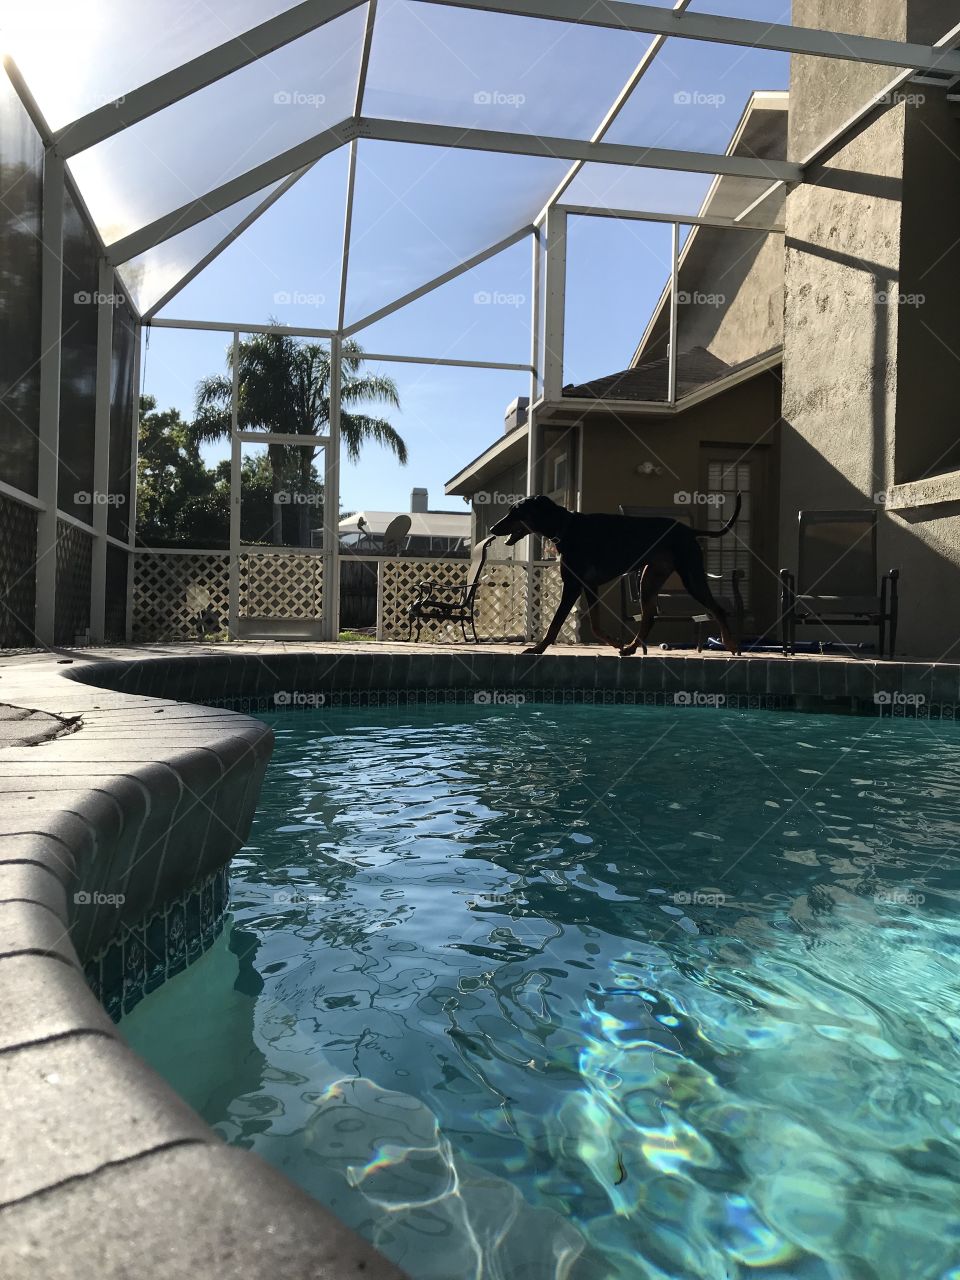 Pool with a dog in the background 